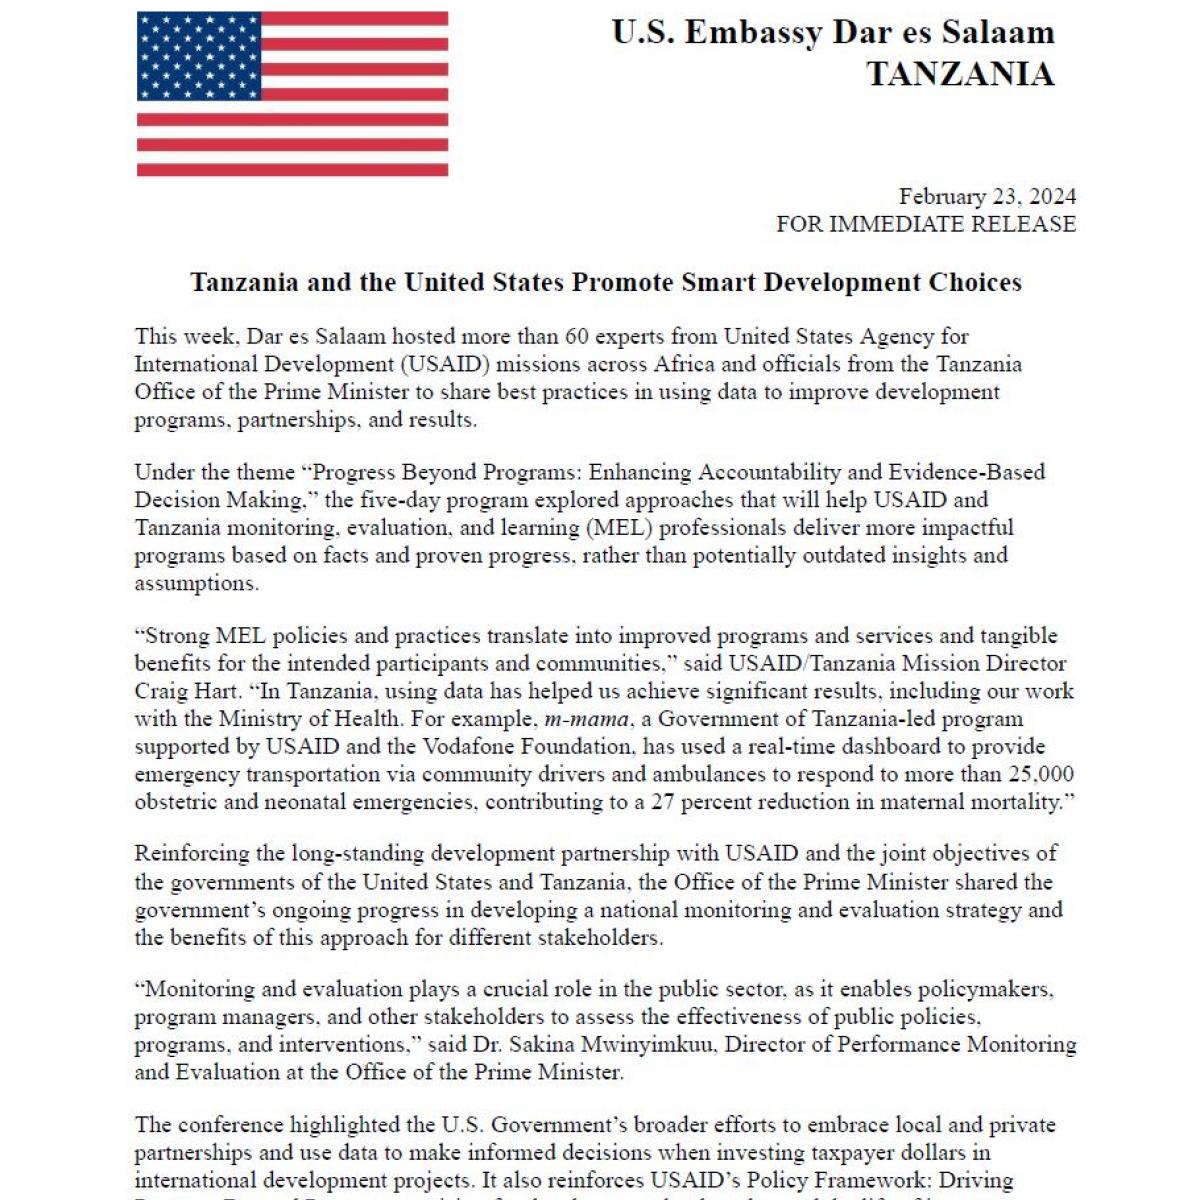 Tanzania and the United States Promote Smart Development Choices